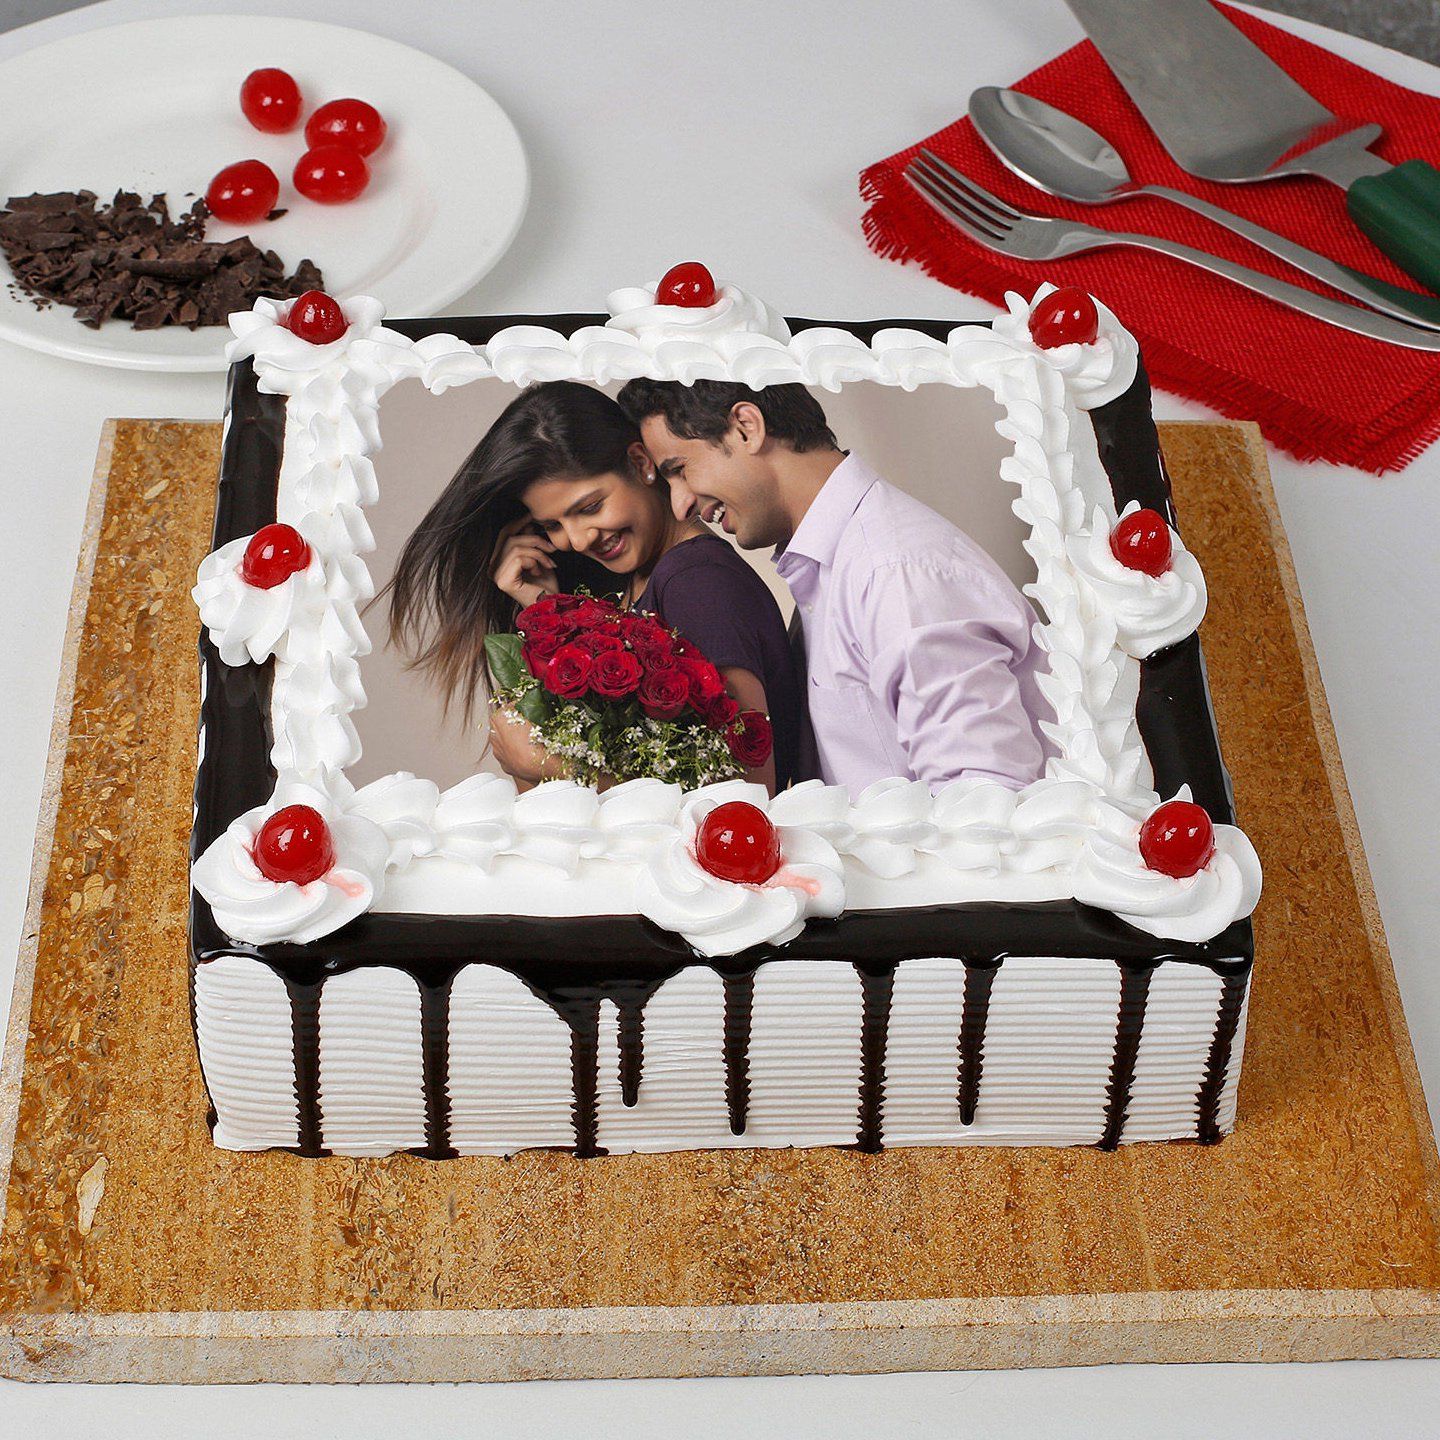 Eggless Square Cakes | Square Birthday & Wedding Cakes | Buy Online |  Delivery Cake | Cake For All Occasions | Eggfree Cake Shop - Eggless Cake  Shop Eggless Cake Inn - Eggless Cake Box - Cake Box